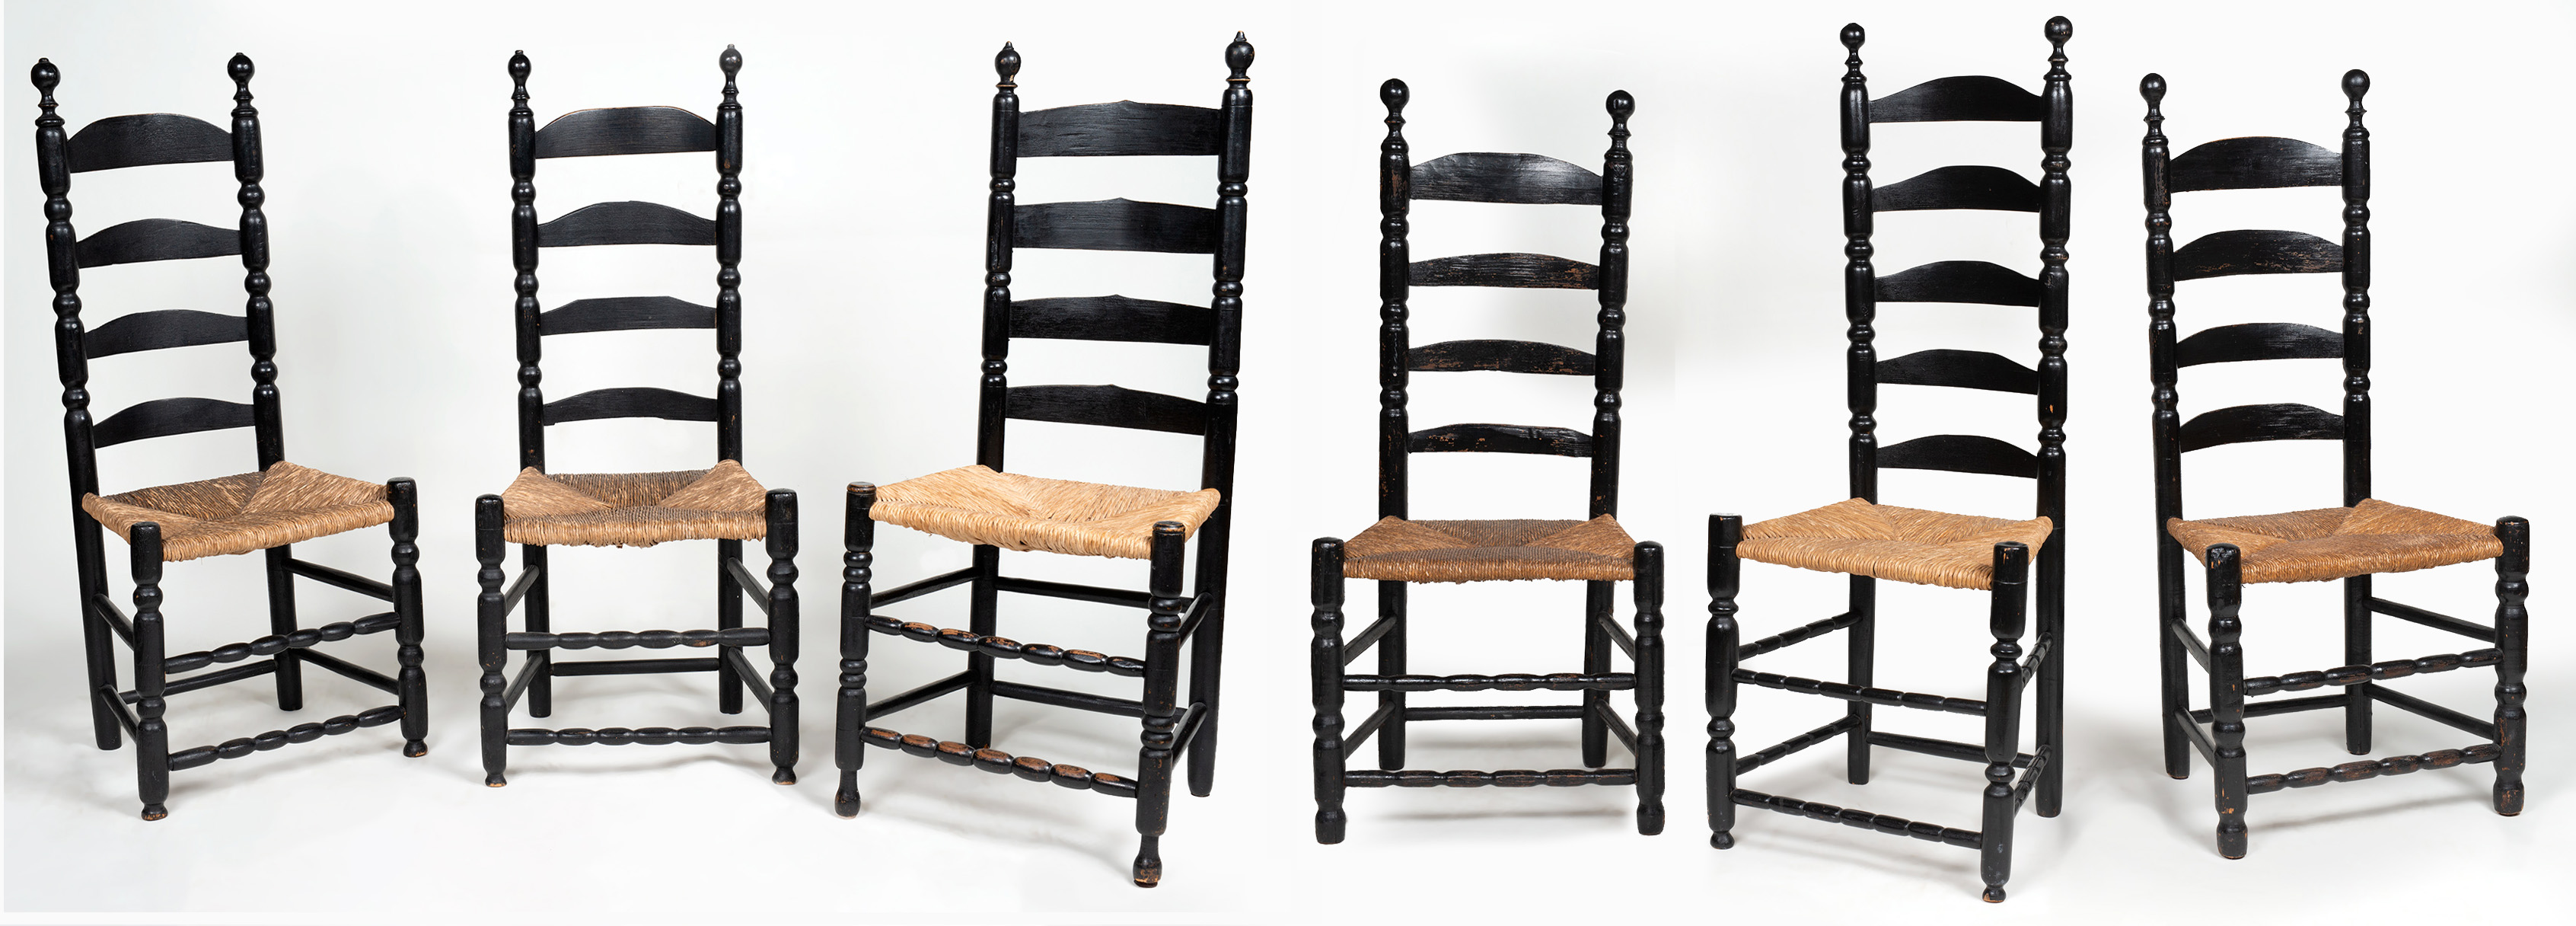 An assembled set of 6 mid-18th c. ladderback sidechairs